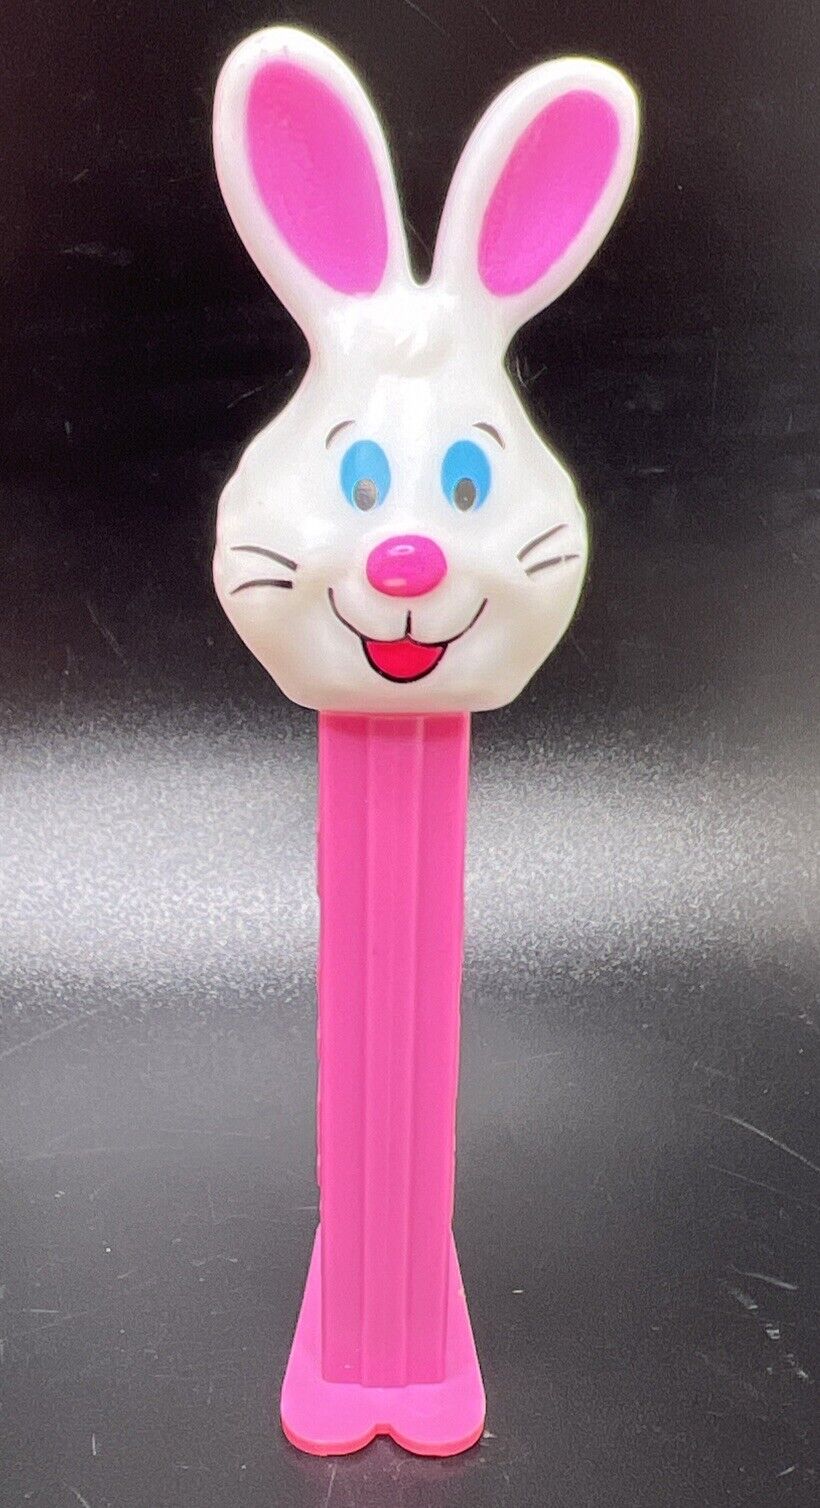 PEZ Dispenser Easter Bunny Rabbit Vintage 1998 Pink White Slovenia Candy Holiday